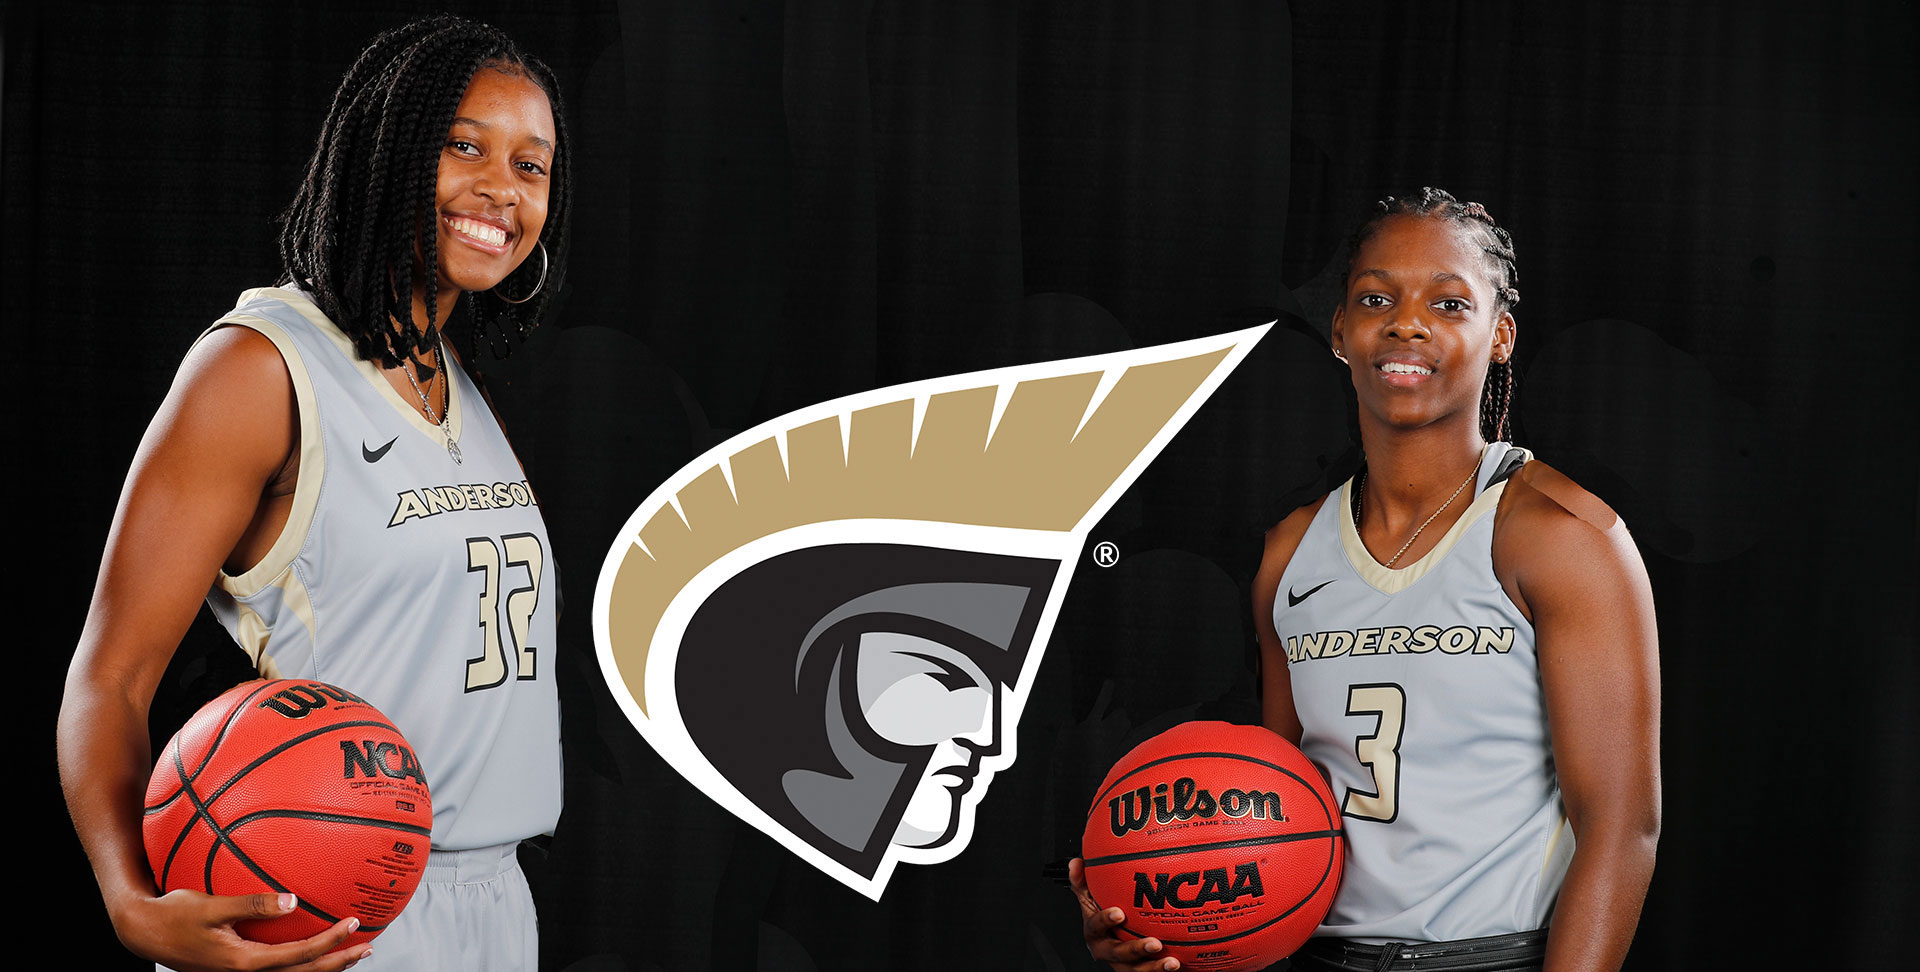 Women's Basketball Game Notes Released For Tusculum